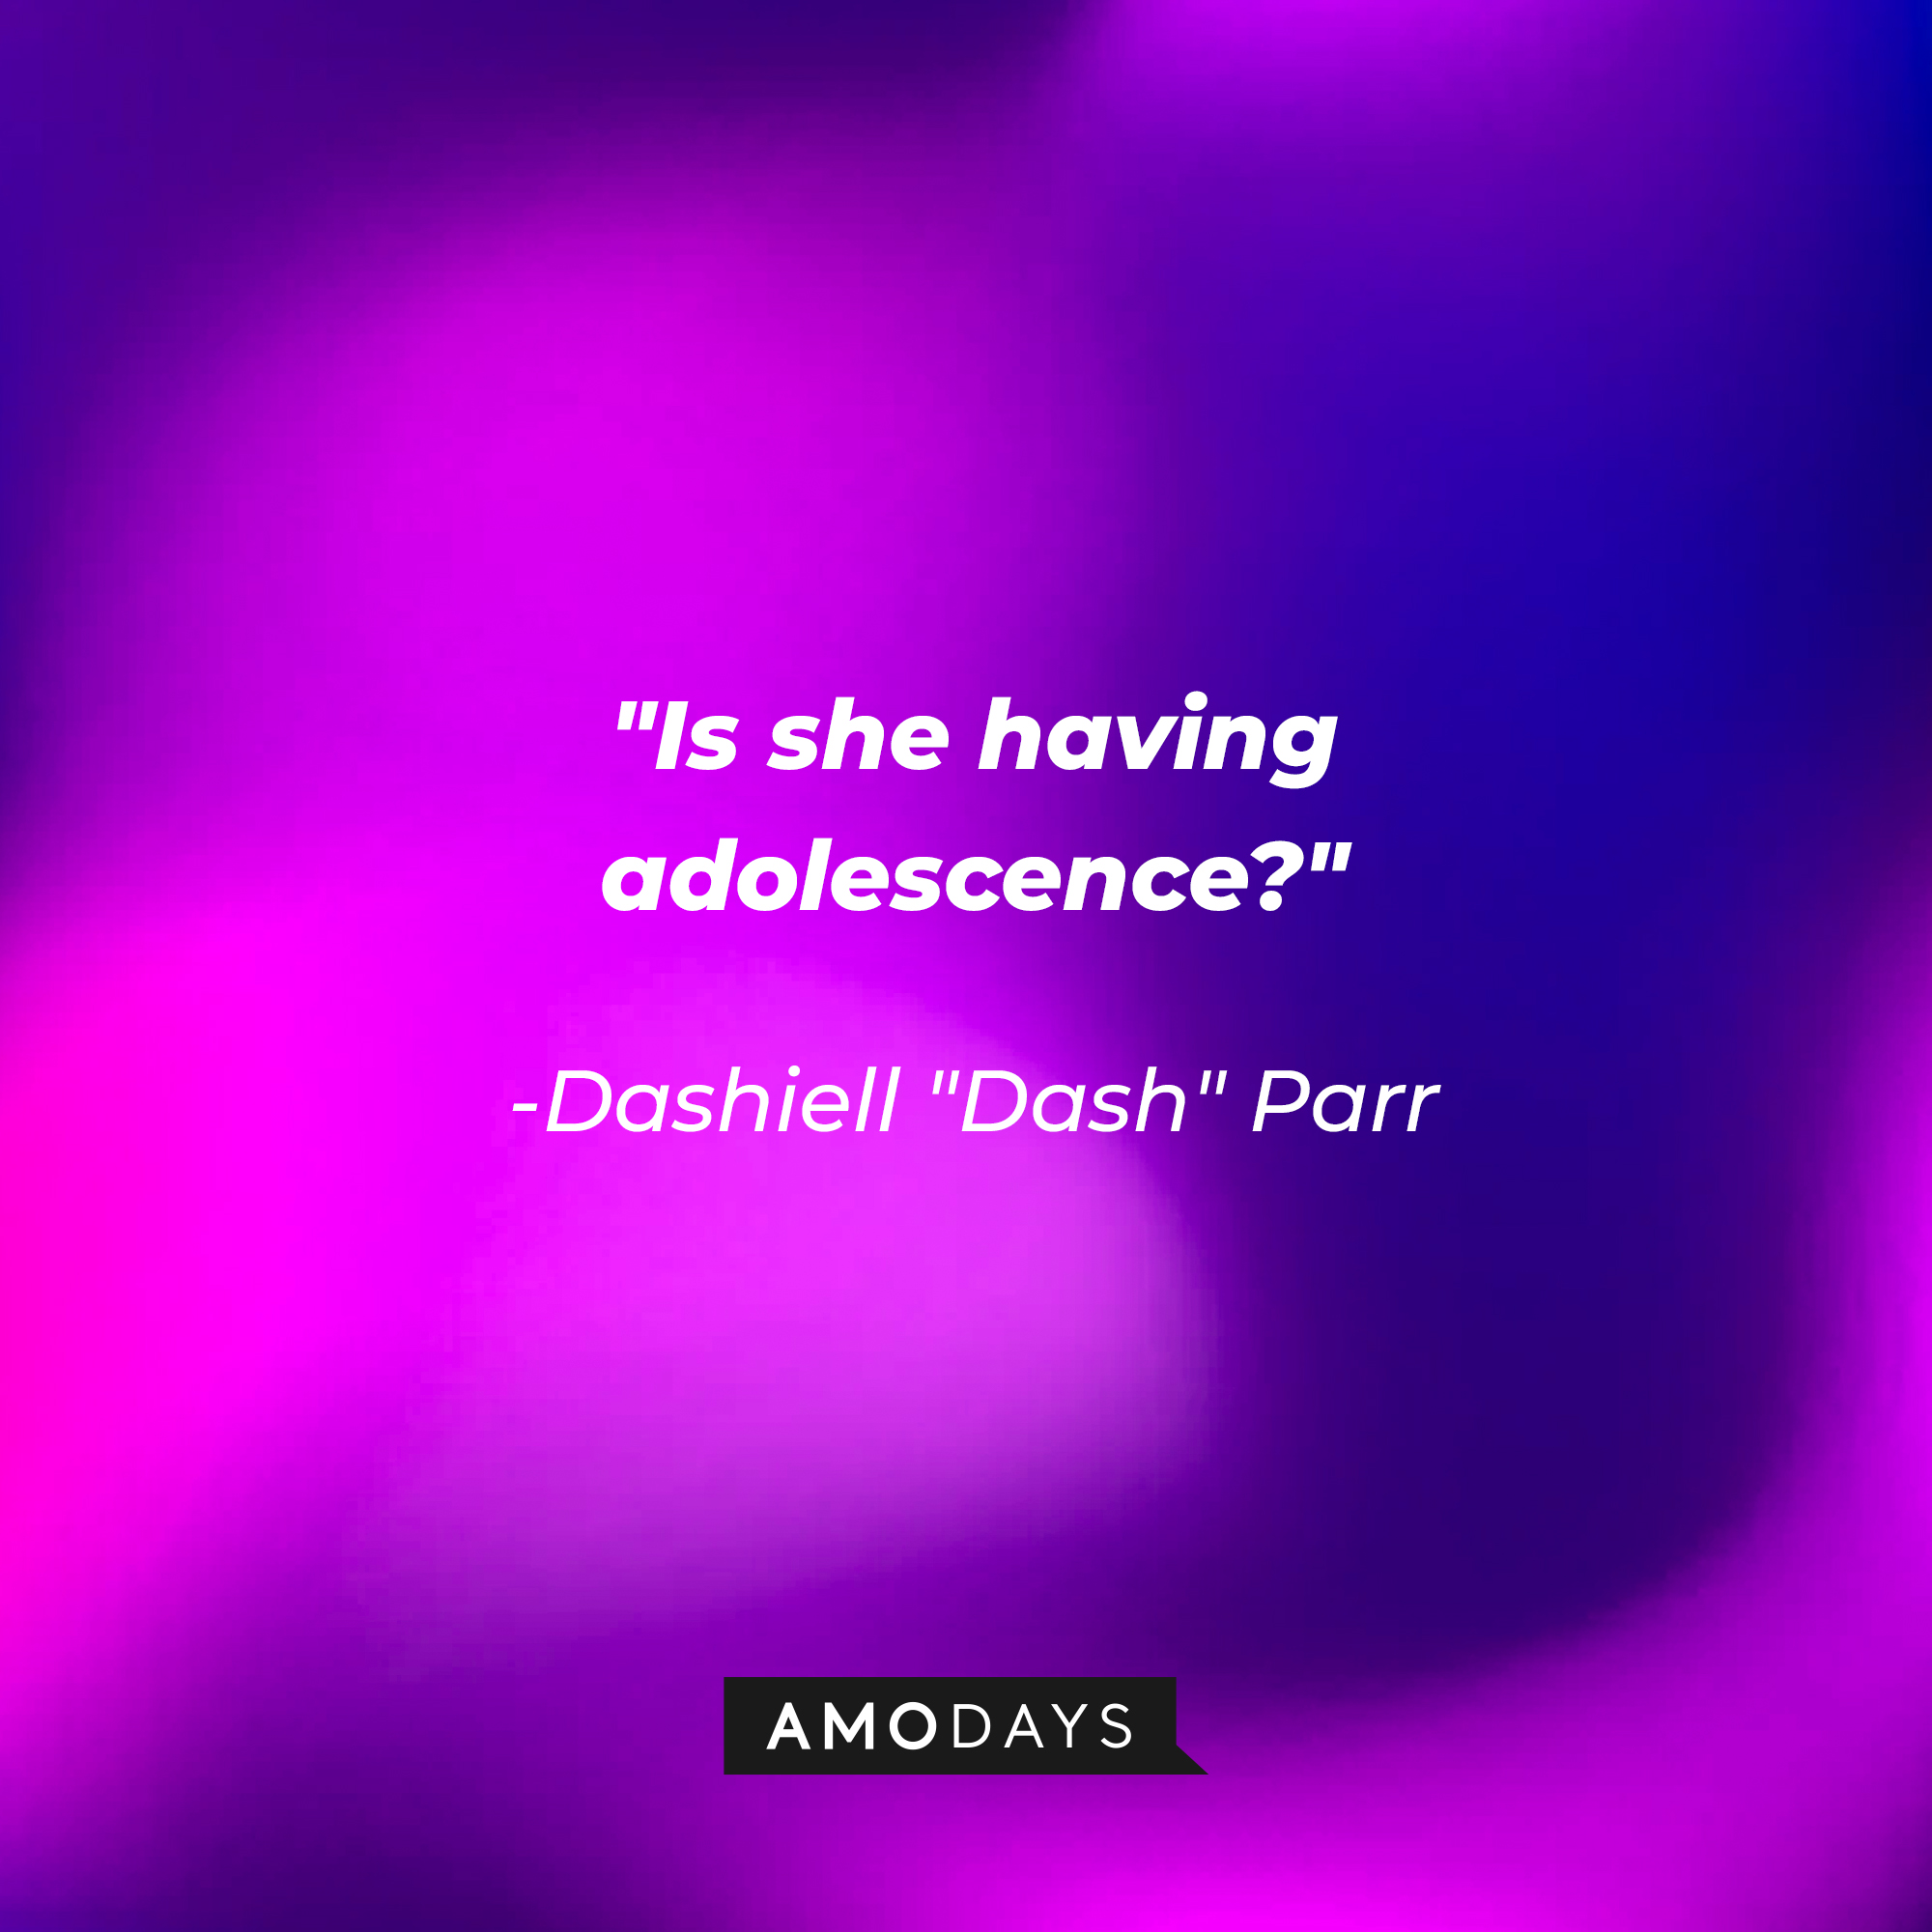 Dashiell "Dash" Parr's quote: "Is she having adolescence" | Source: Amodays